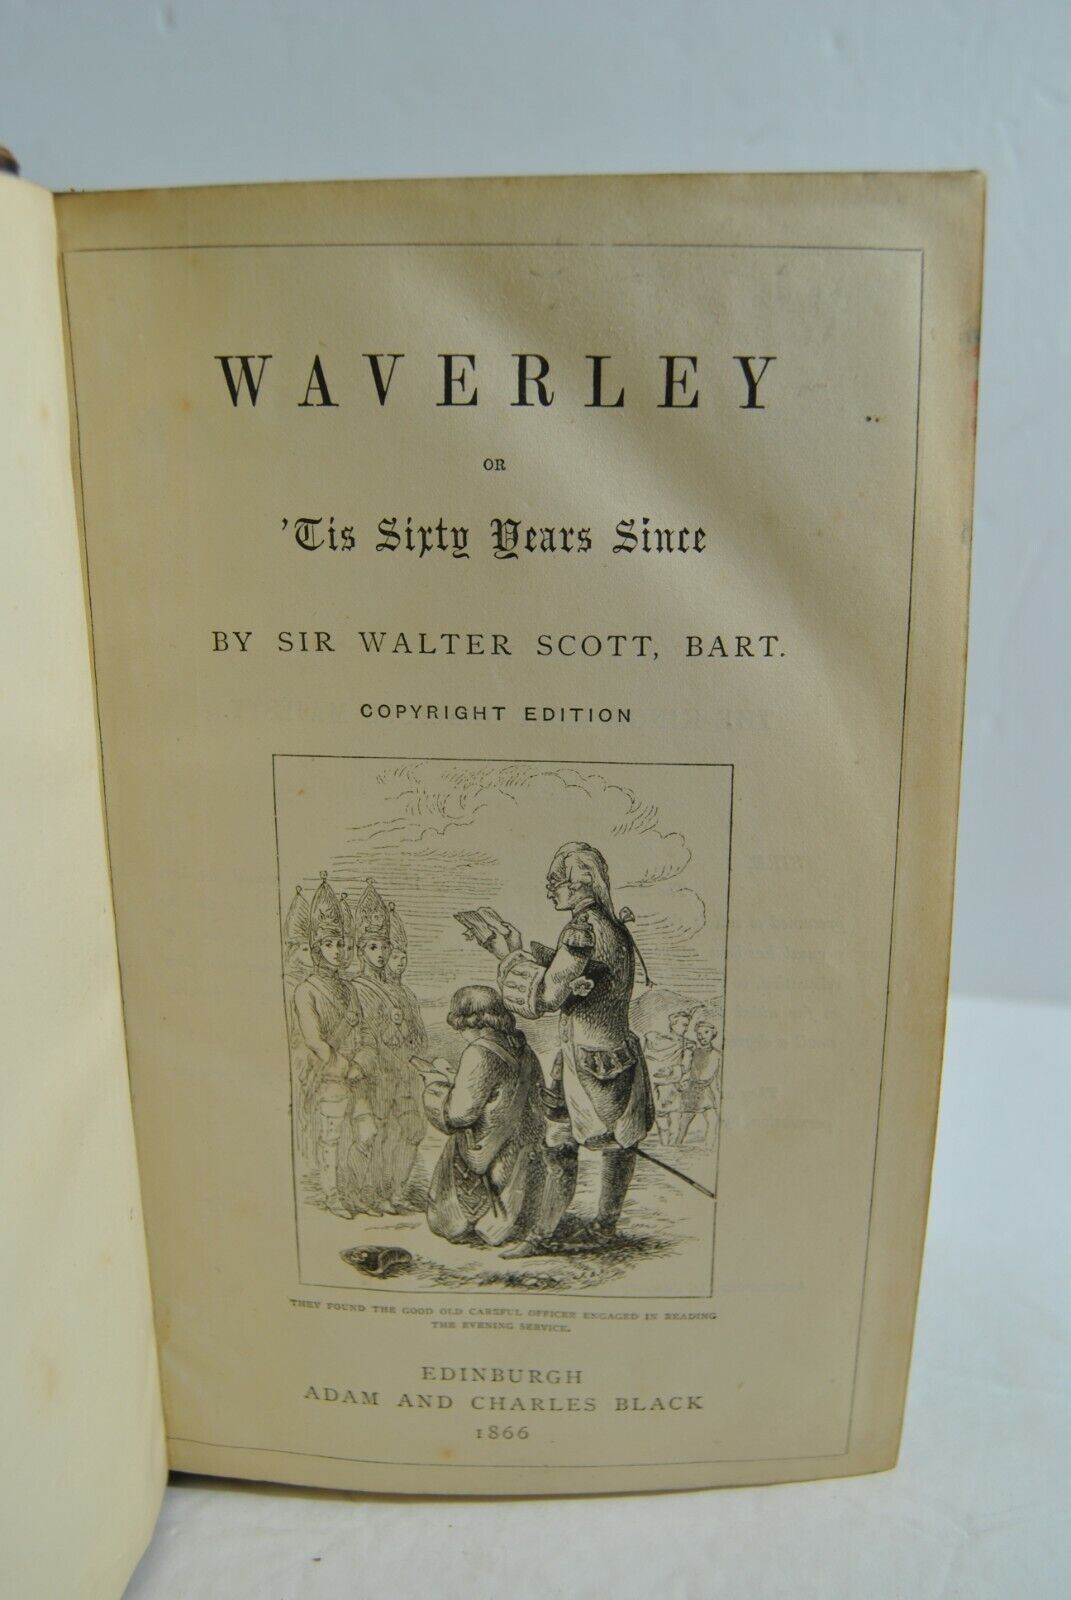 The Waverley Novels by Sir Walter Scott Copyright Edition 1868 Volume First